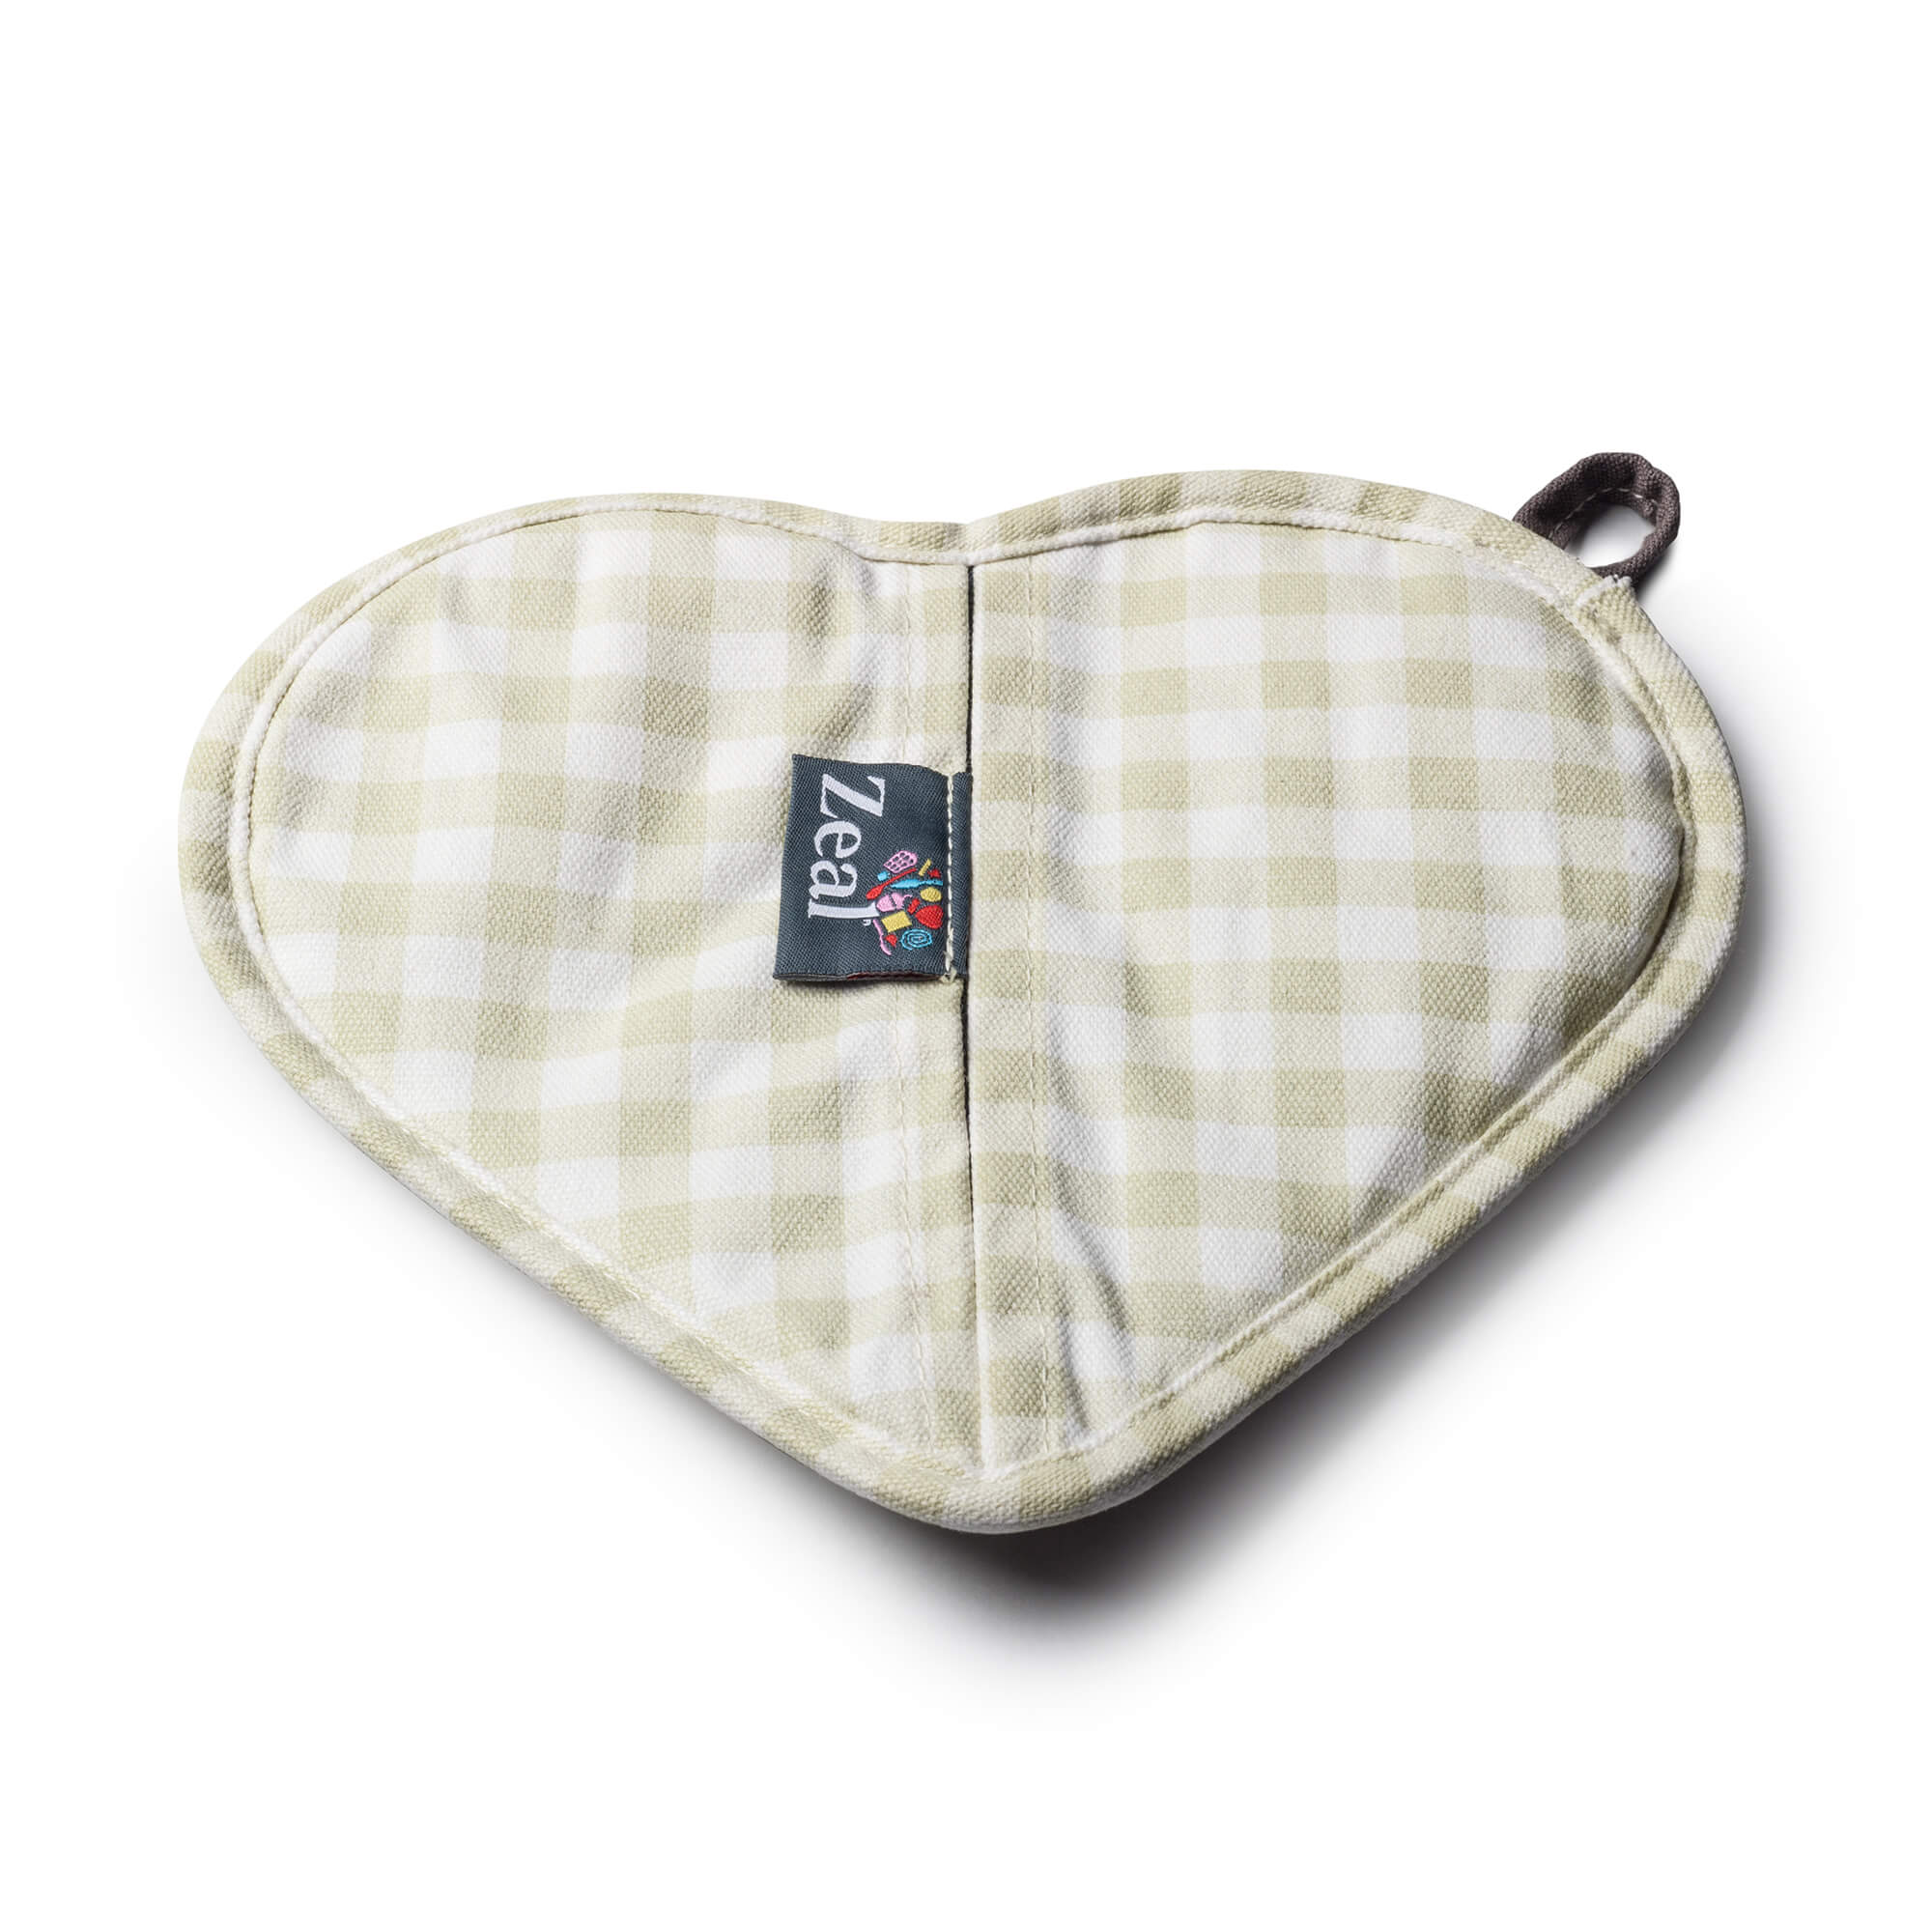 Cream Heart Shaped Silicone Hot Mat and Grab with gingham fabric